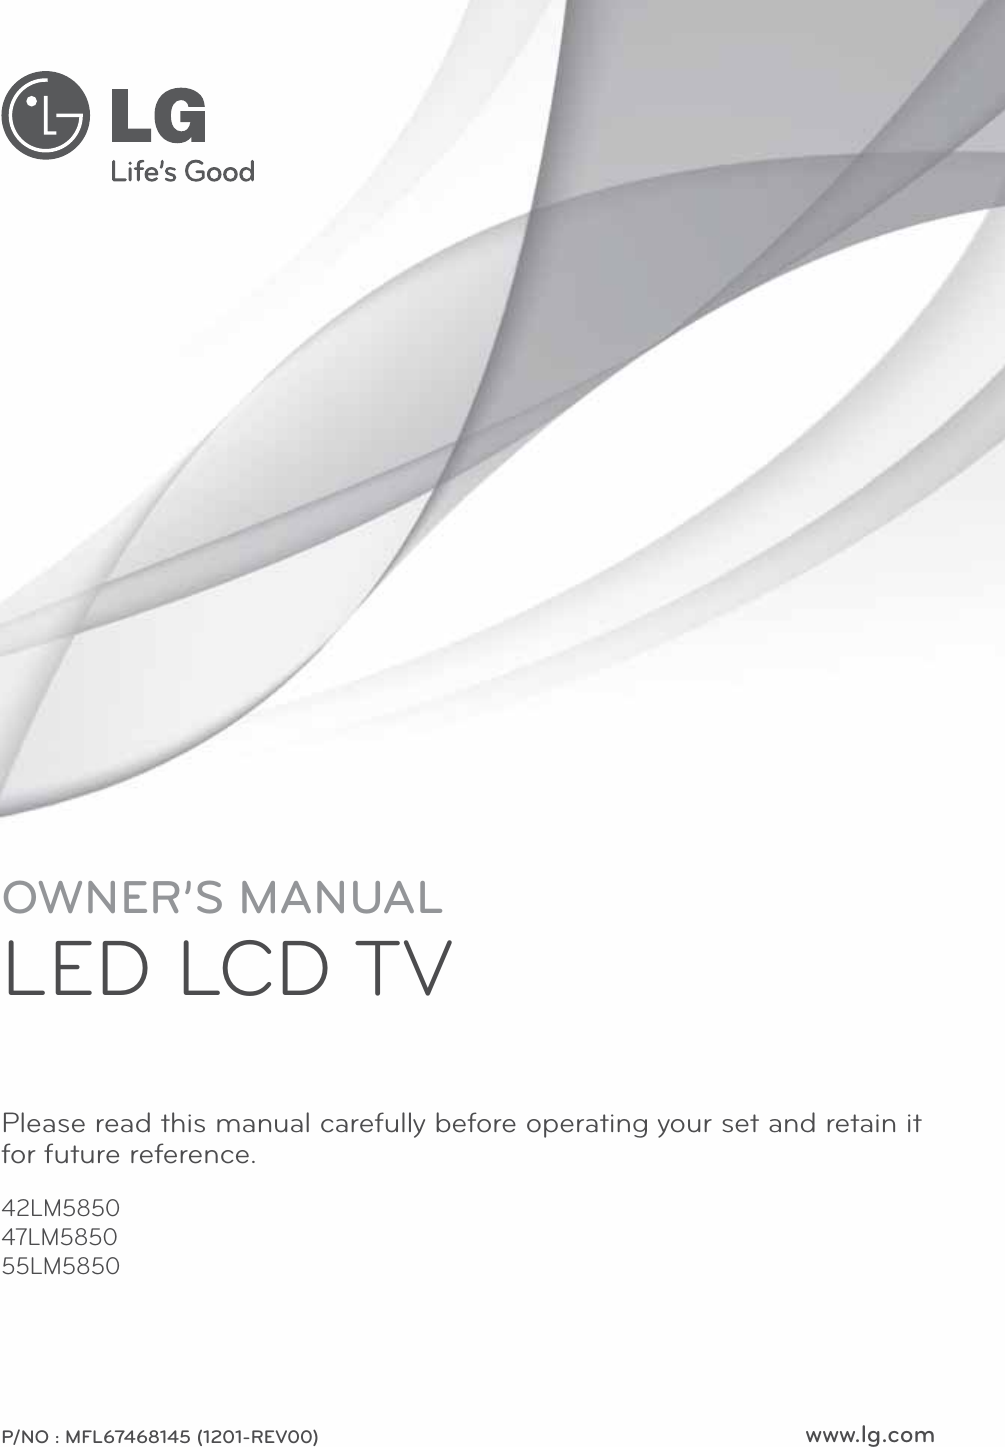 www.lg.comOWNER’S MANUALLED LCD TVPlease read this manual carefully before operating your set and retain it for future reference.P/NO : MFL67468145 (1201-REV00)42LM585047LM585055LM5850